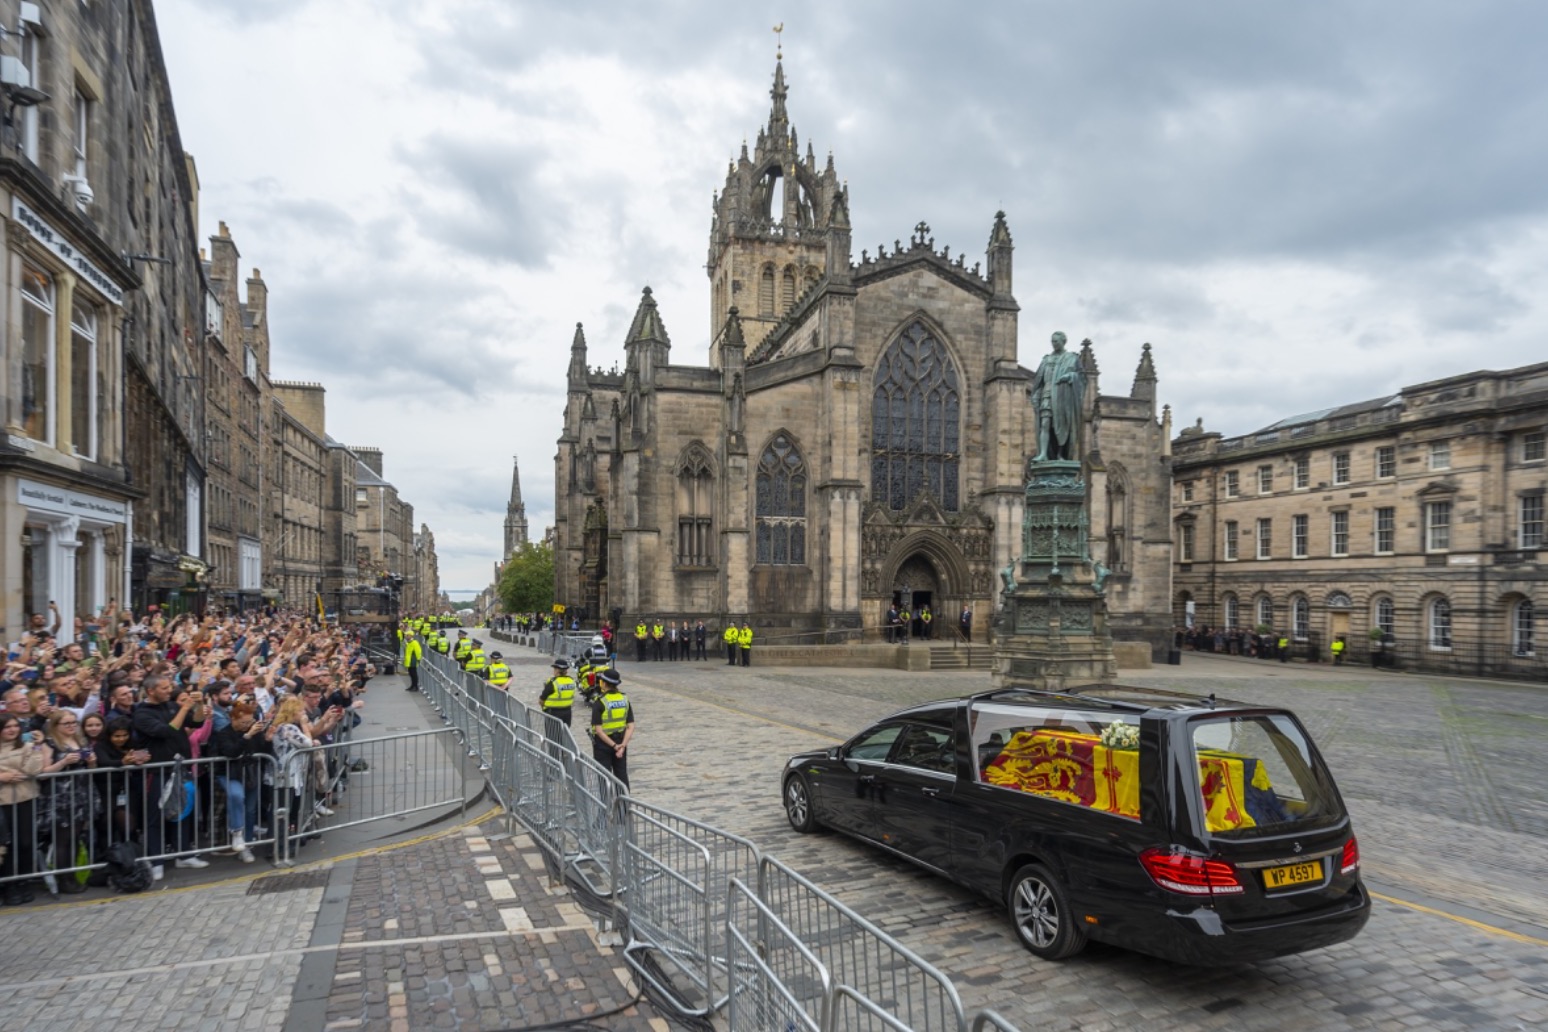 Thousands line Queen’s coffin route to pay final respects in Scotland 